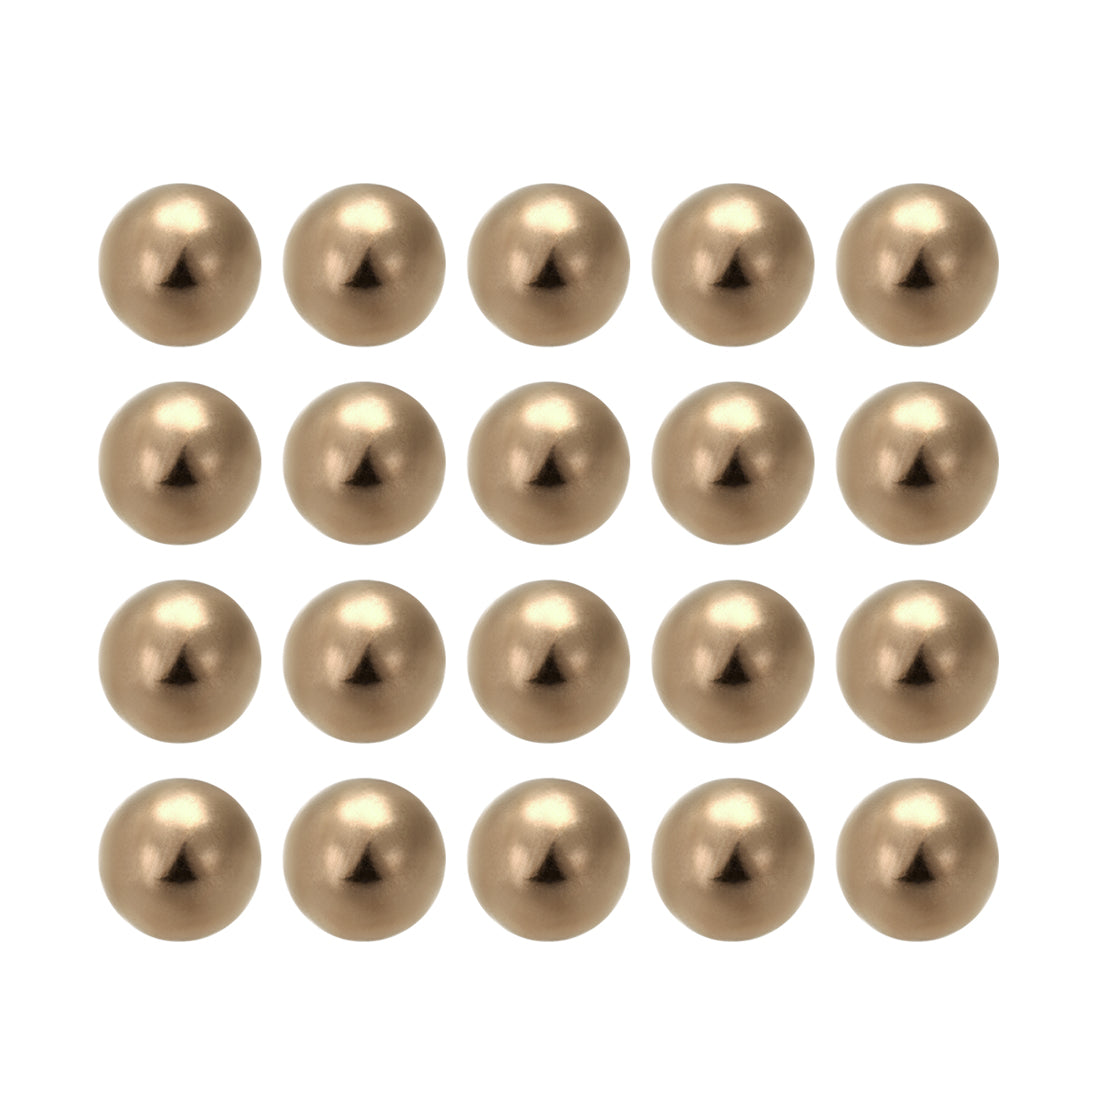 Uxcell Uxcell 6mm Precision Solid Brass Bearing Balls 20pcs